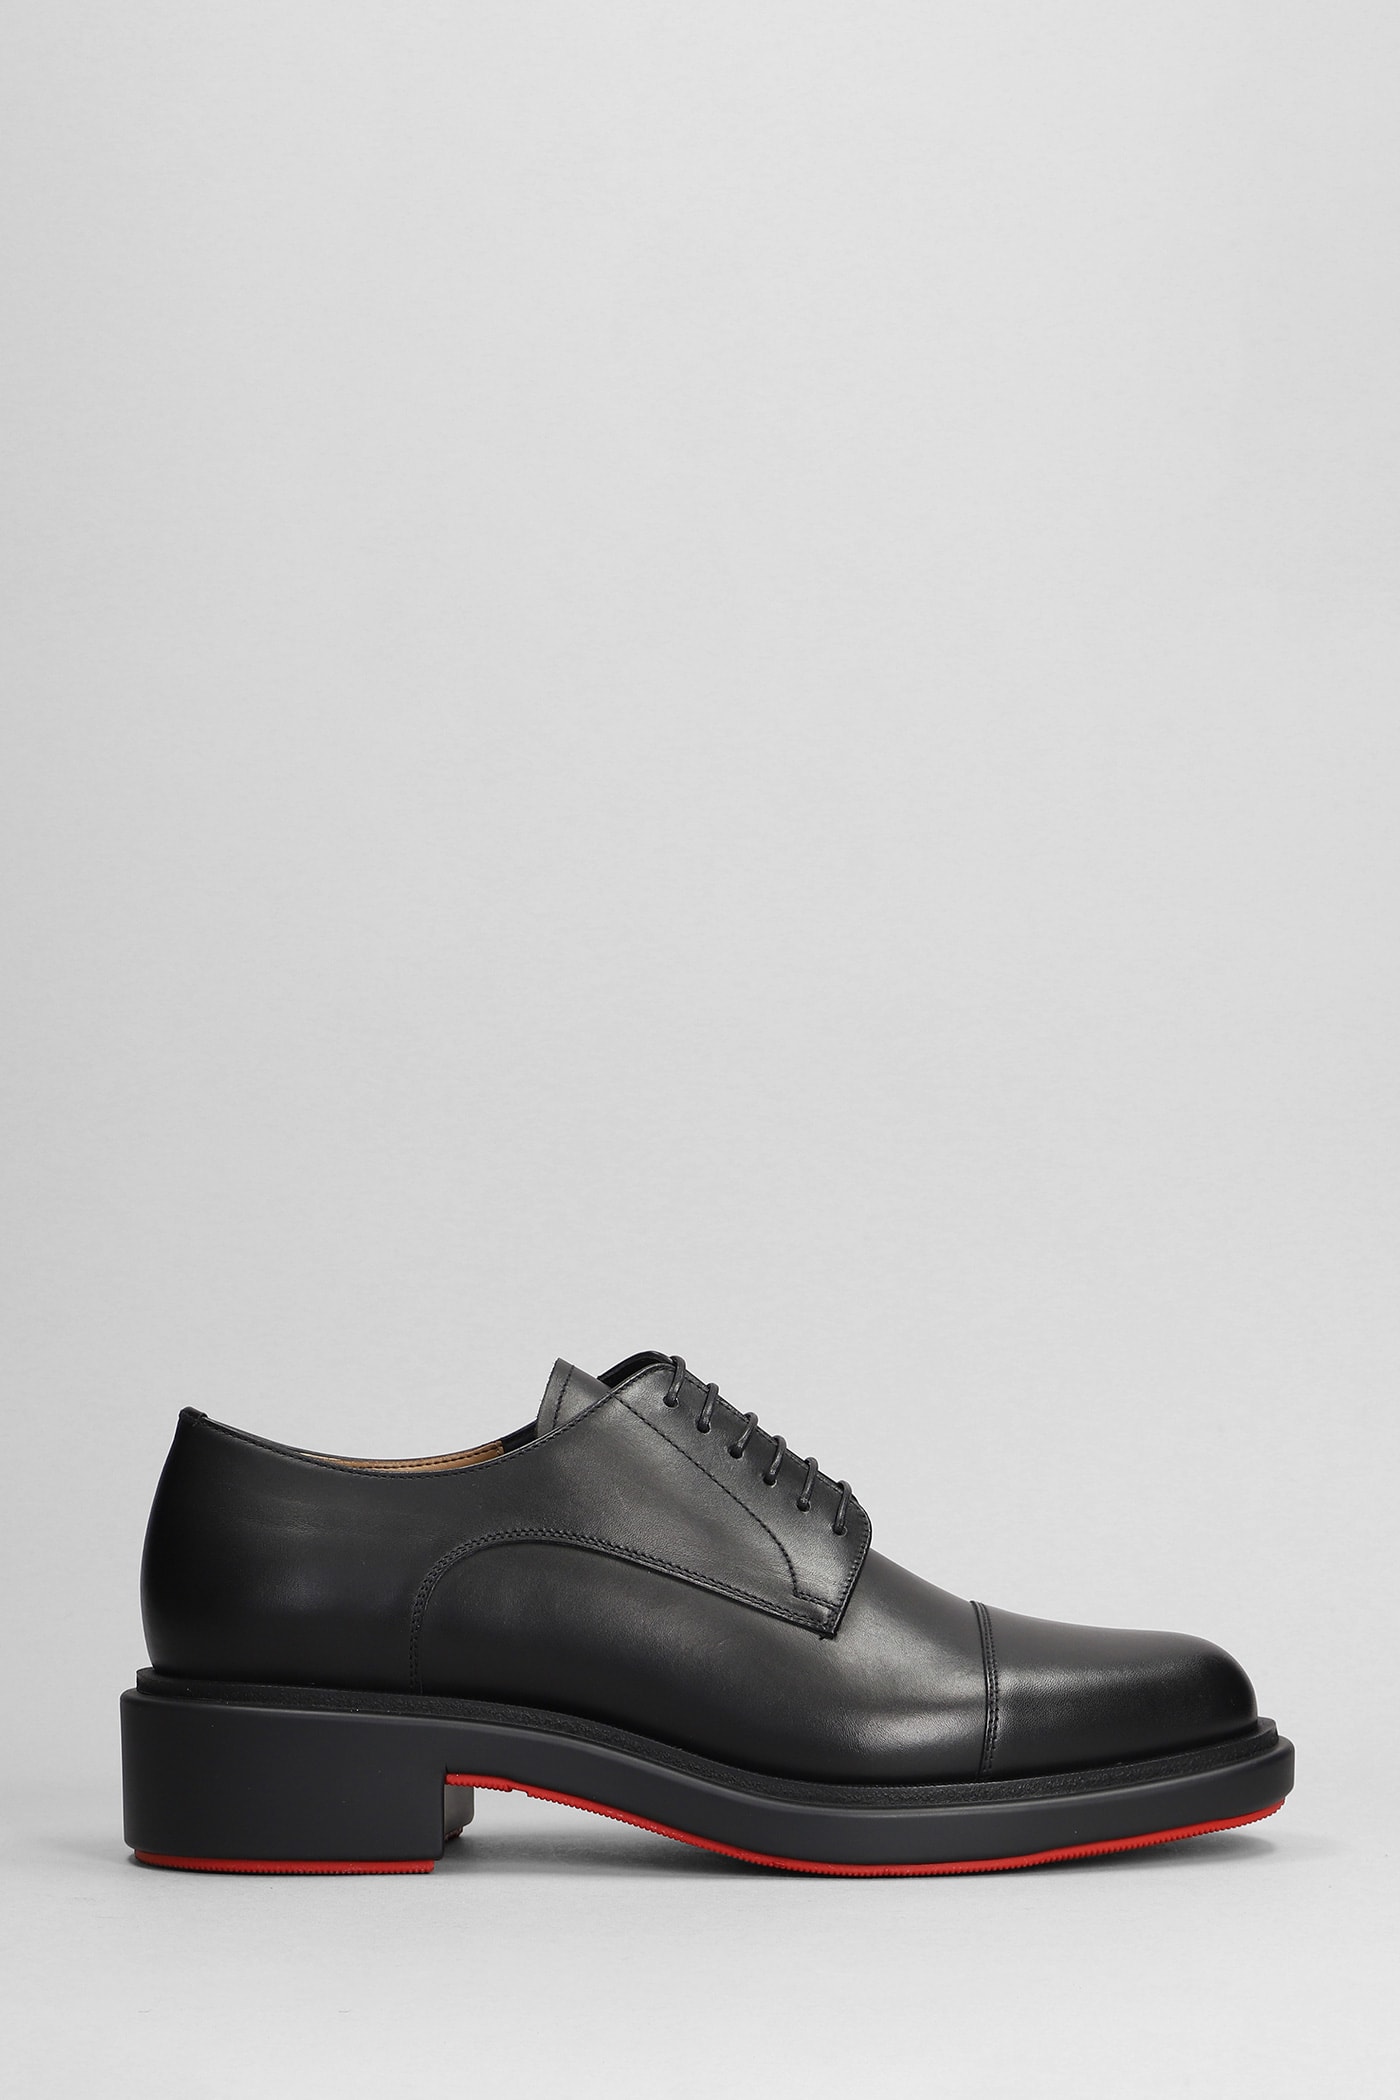 Urbino Lace Up Shoes In Black Leather